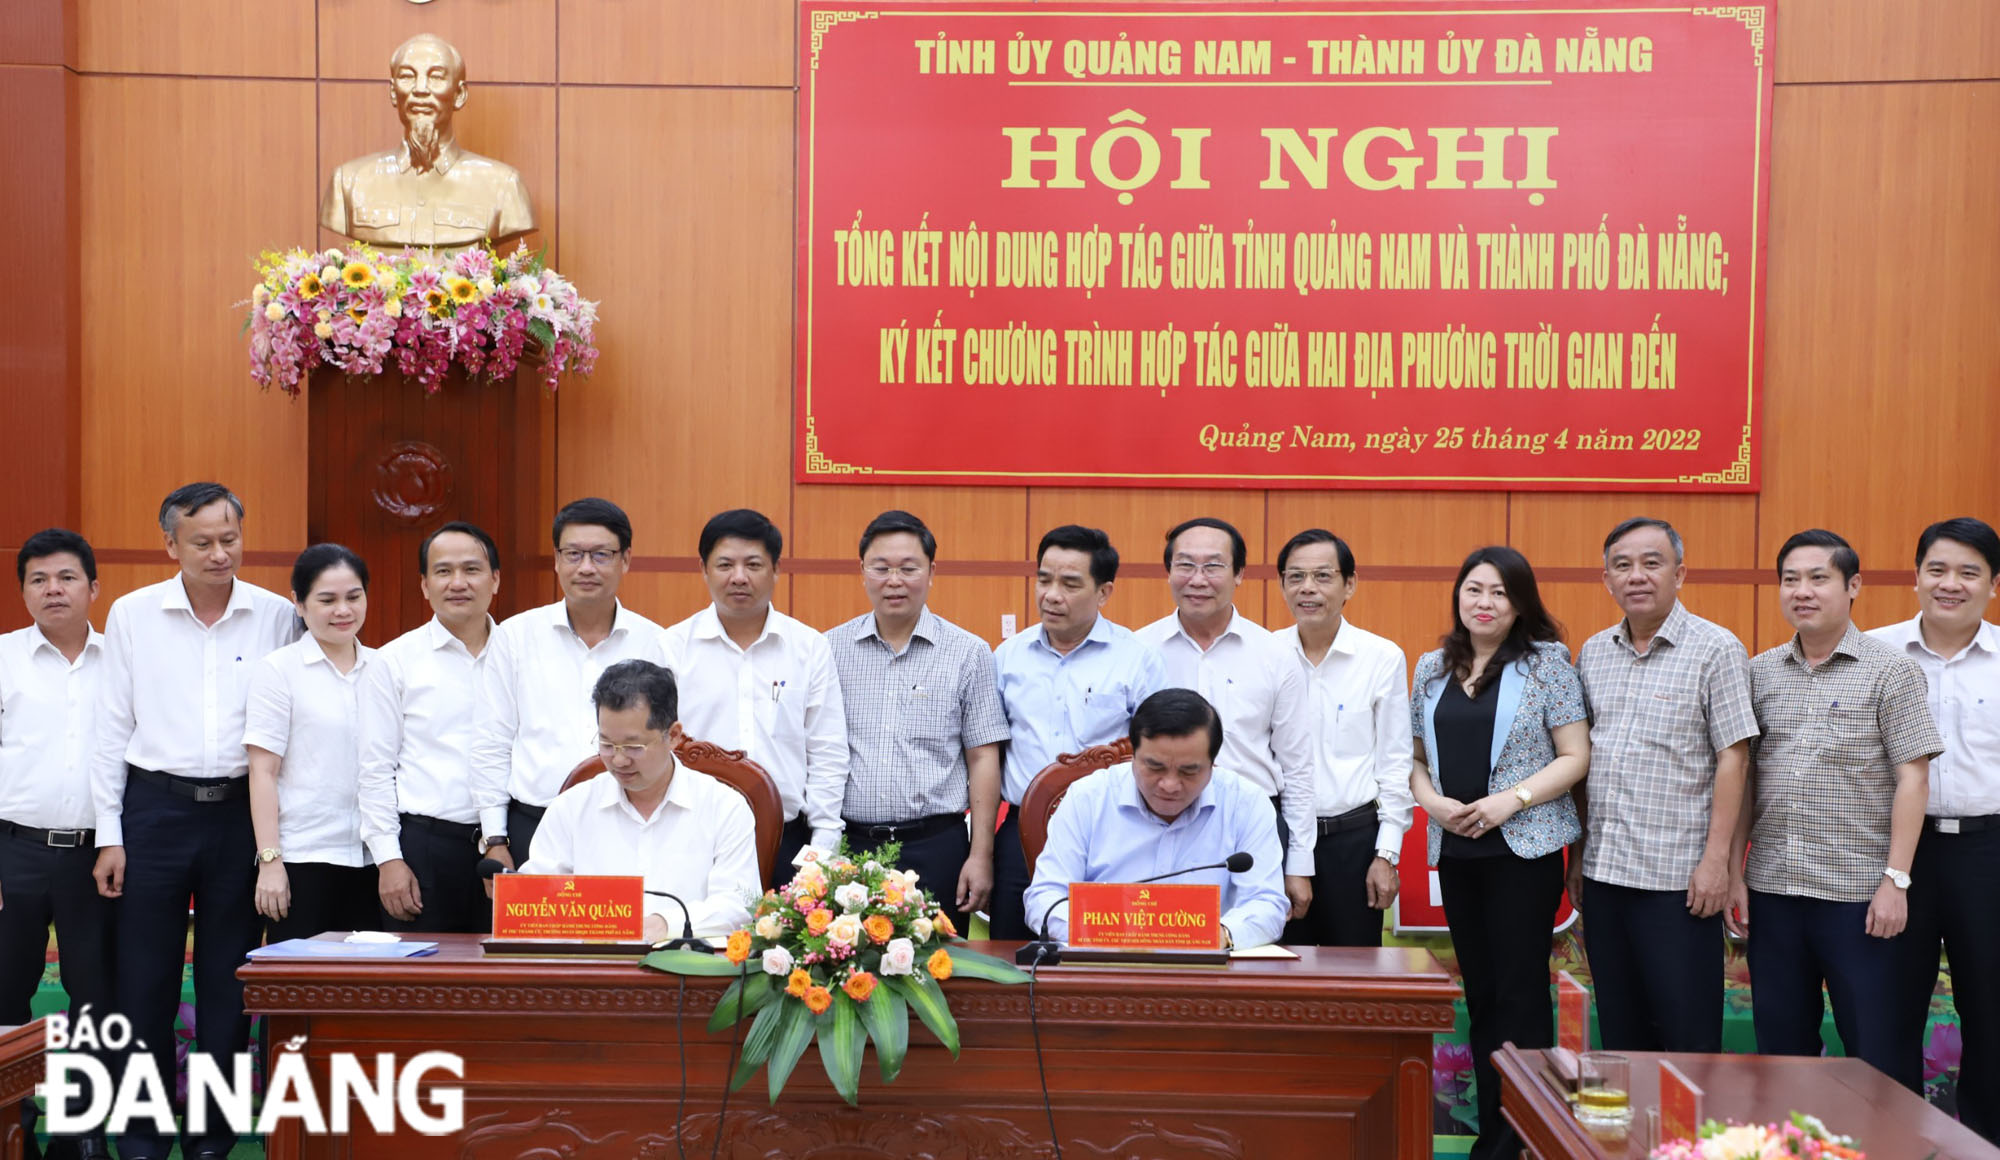  Da Nang Party Committee Secretary Nguyen Van Quang  front row ,left) and Quang Nam Provincial Party Committee Secretary  Phan Viet Cuong (front row, right) sign a cooperation and development programme between the two localities in the near future, April 25, 2022. Photo: NGOC PHU